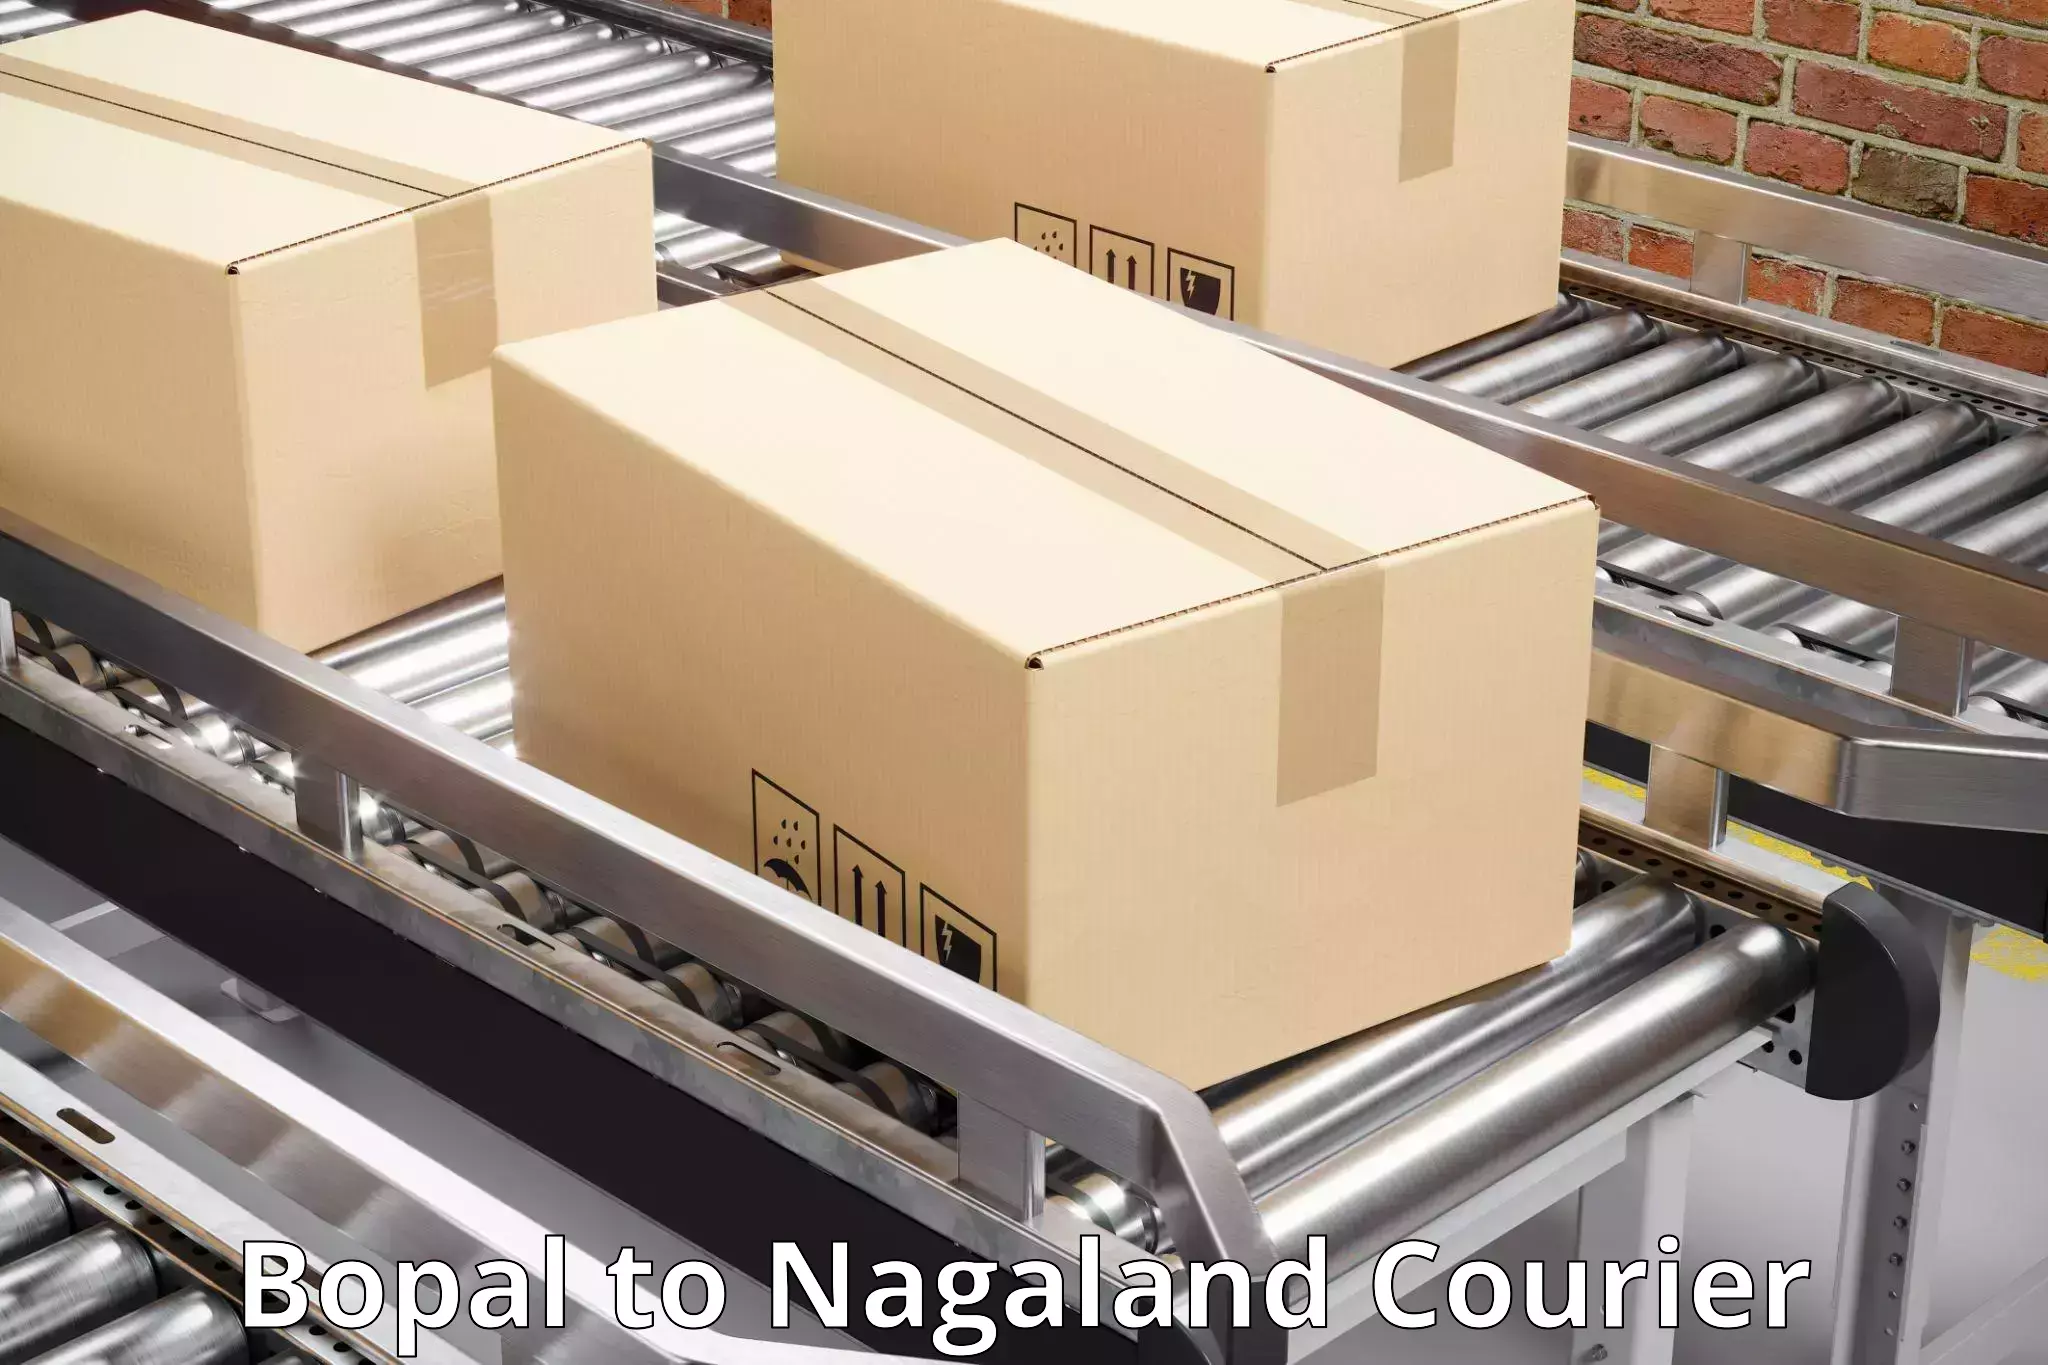 Same-day delivery options Bopal to Nagaland